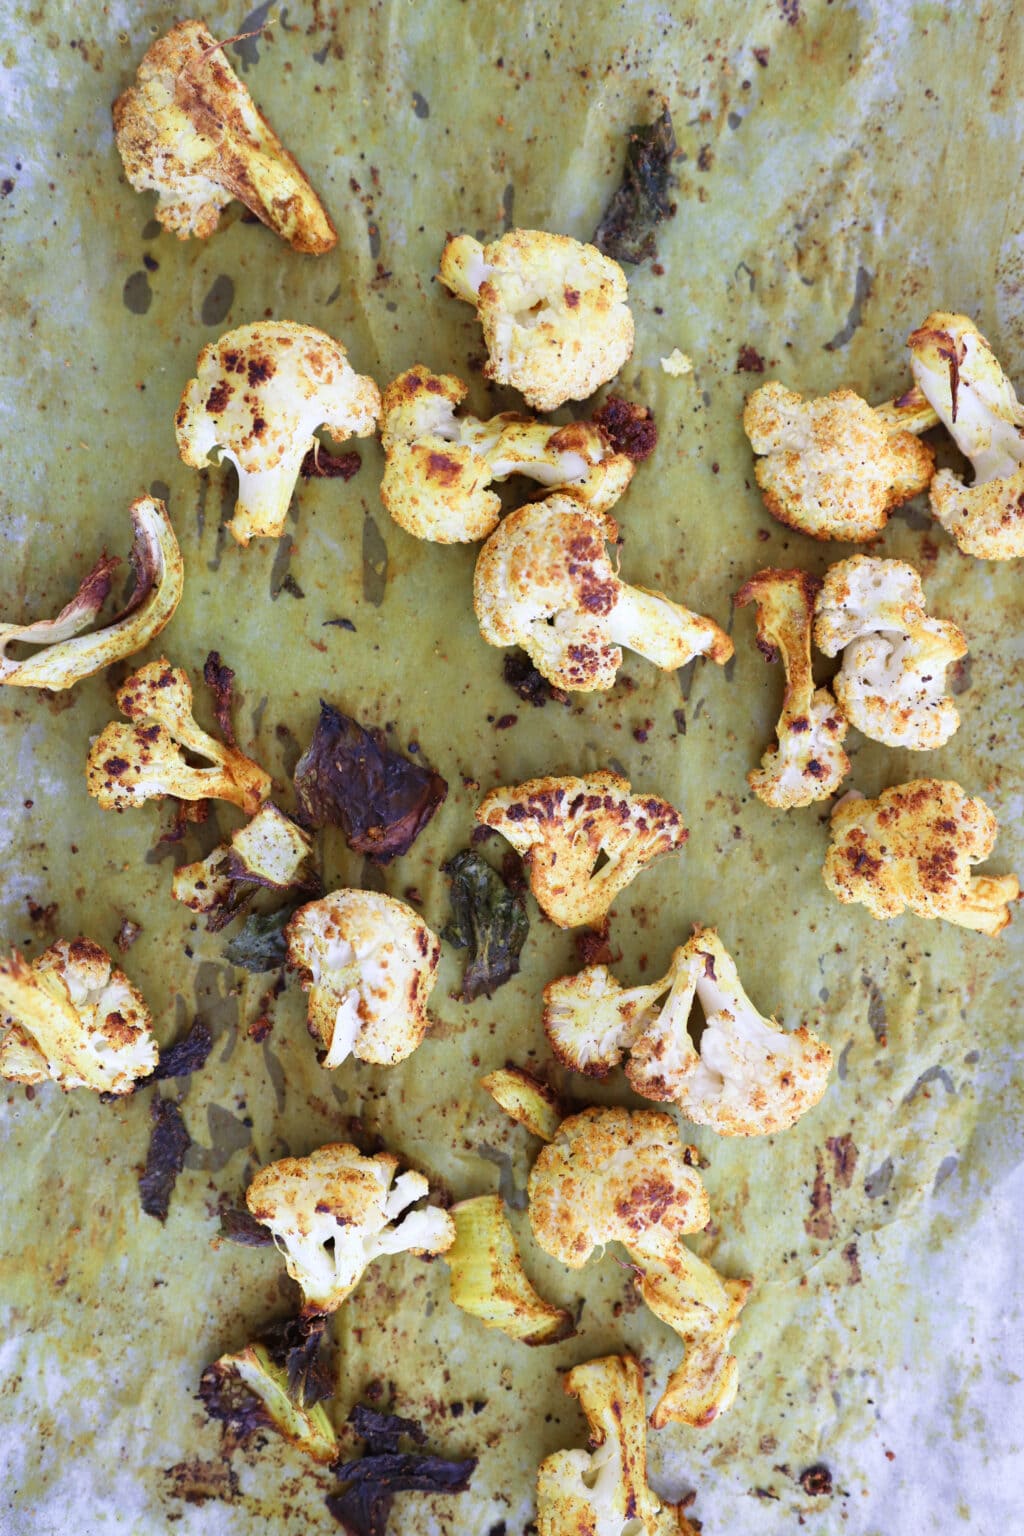 Roasted cauliflower florets on a parchment-lined baking sheet